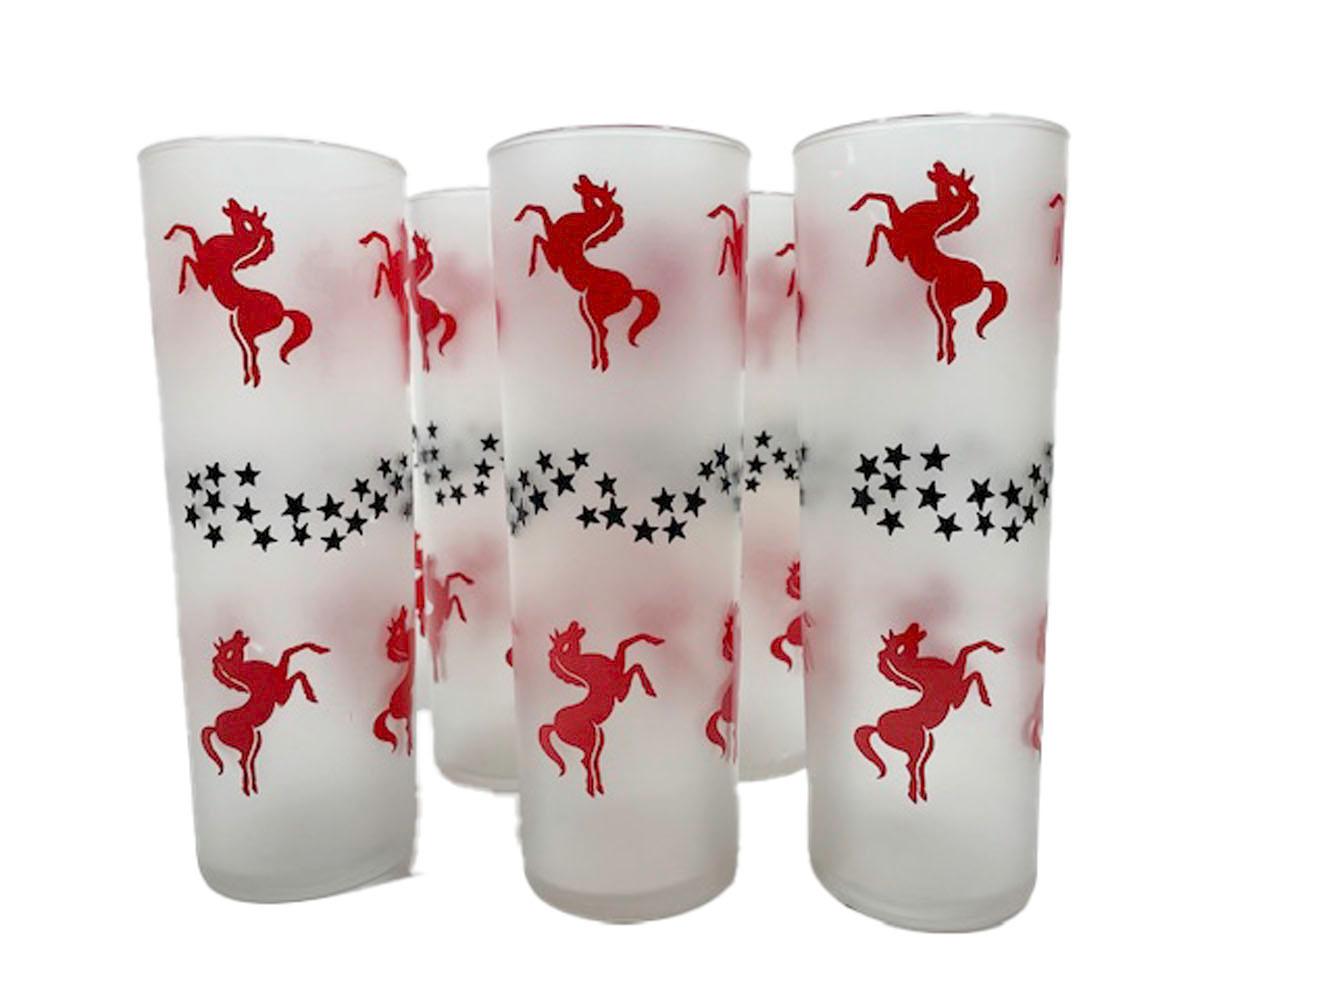 8 Vintage Libbey Frosted Tom Collins Glasses with Red Horses and Black Stars 1